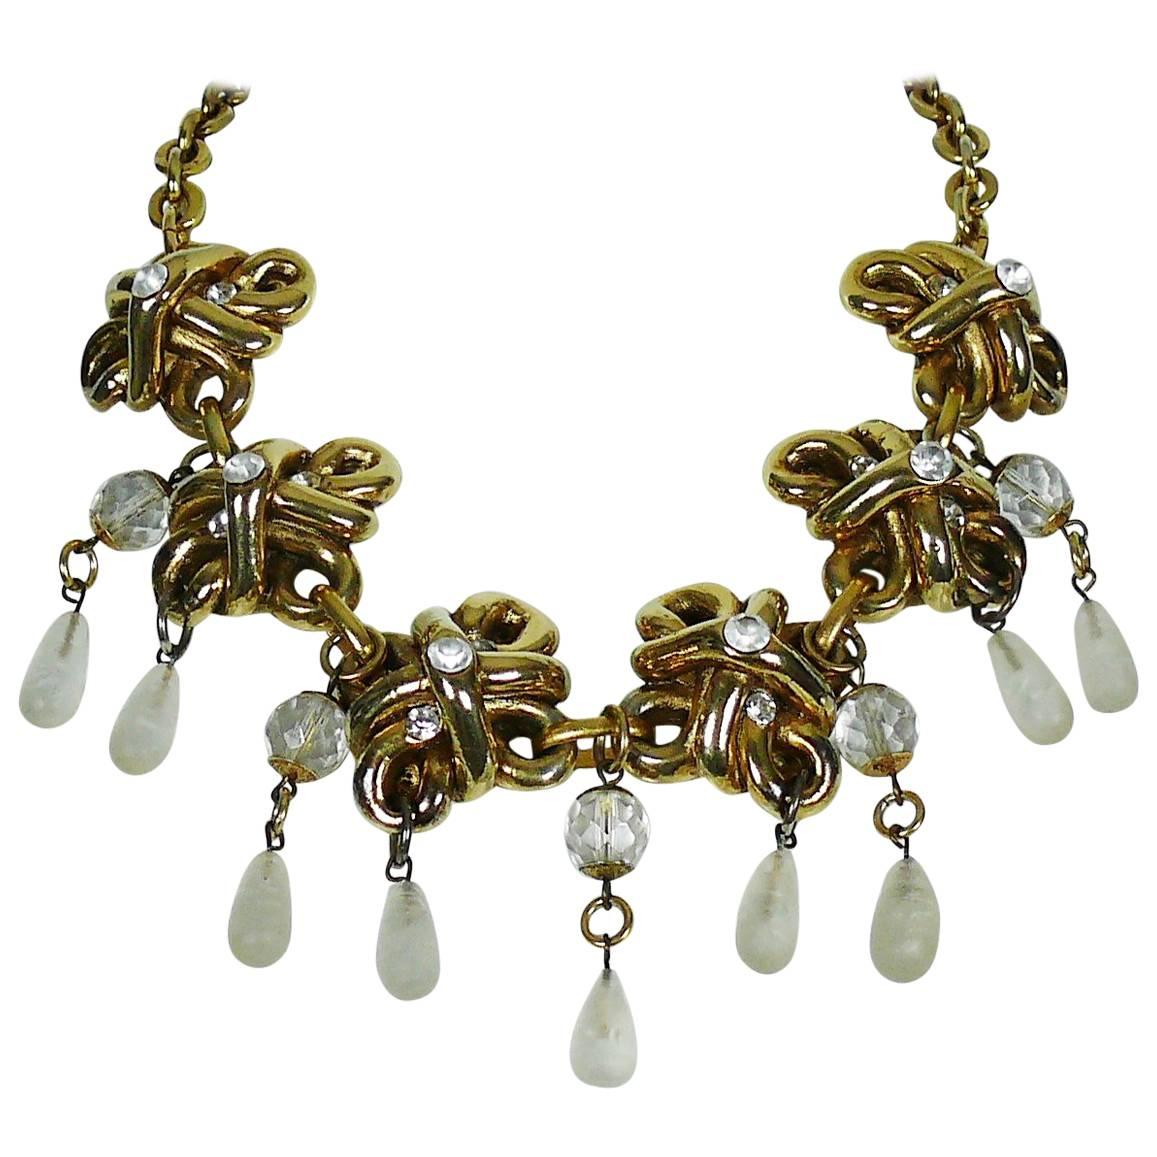 Claire Deve Vintage Gold Tone Jewelled Necklace with Glass Drops For Sale